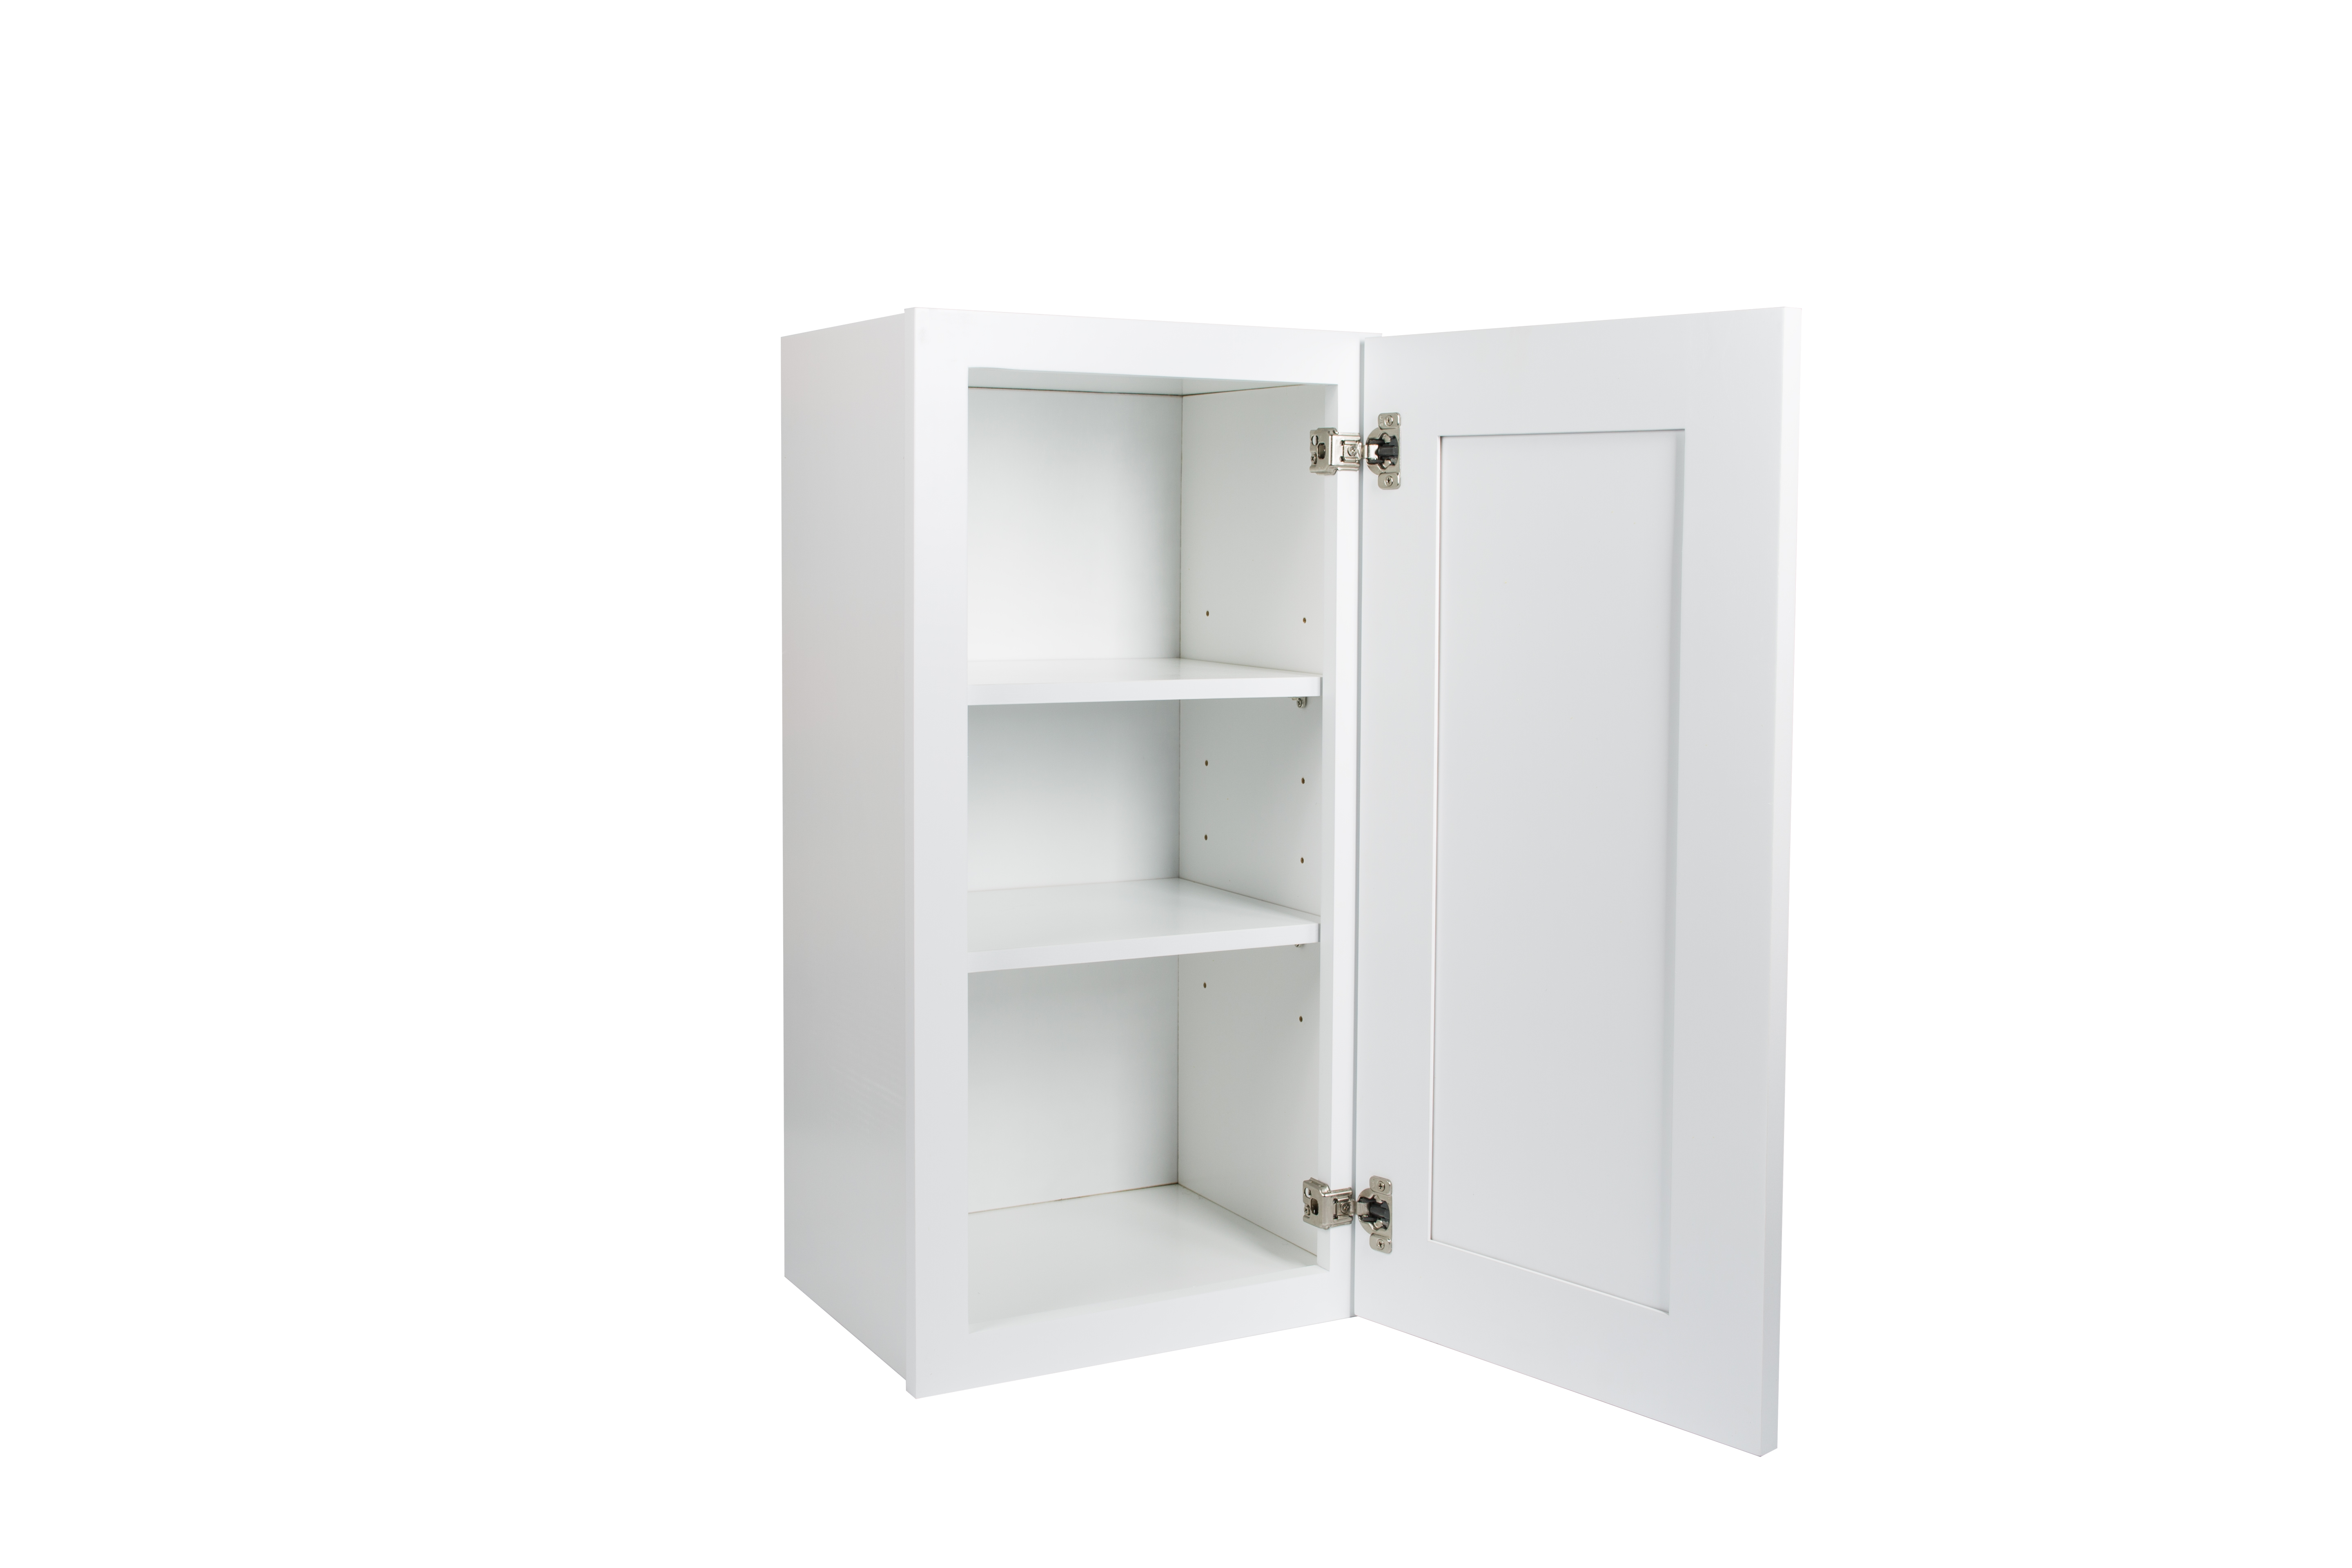 Ready to Assemble 9Wx30Hx12D in. Shaker Wall Cabinet with 1-Door and Adjustable Shelves in White